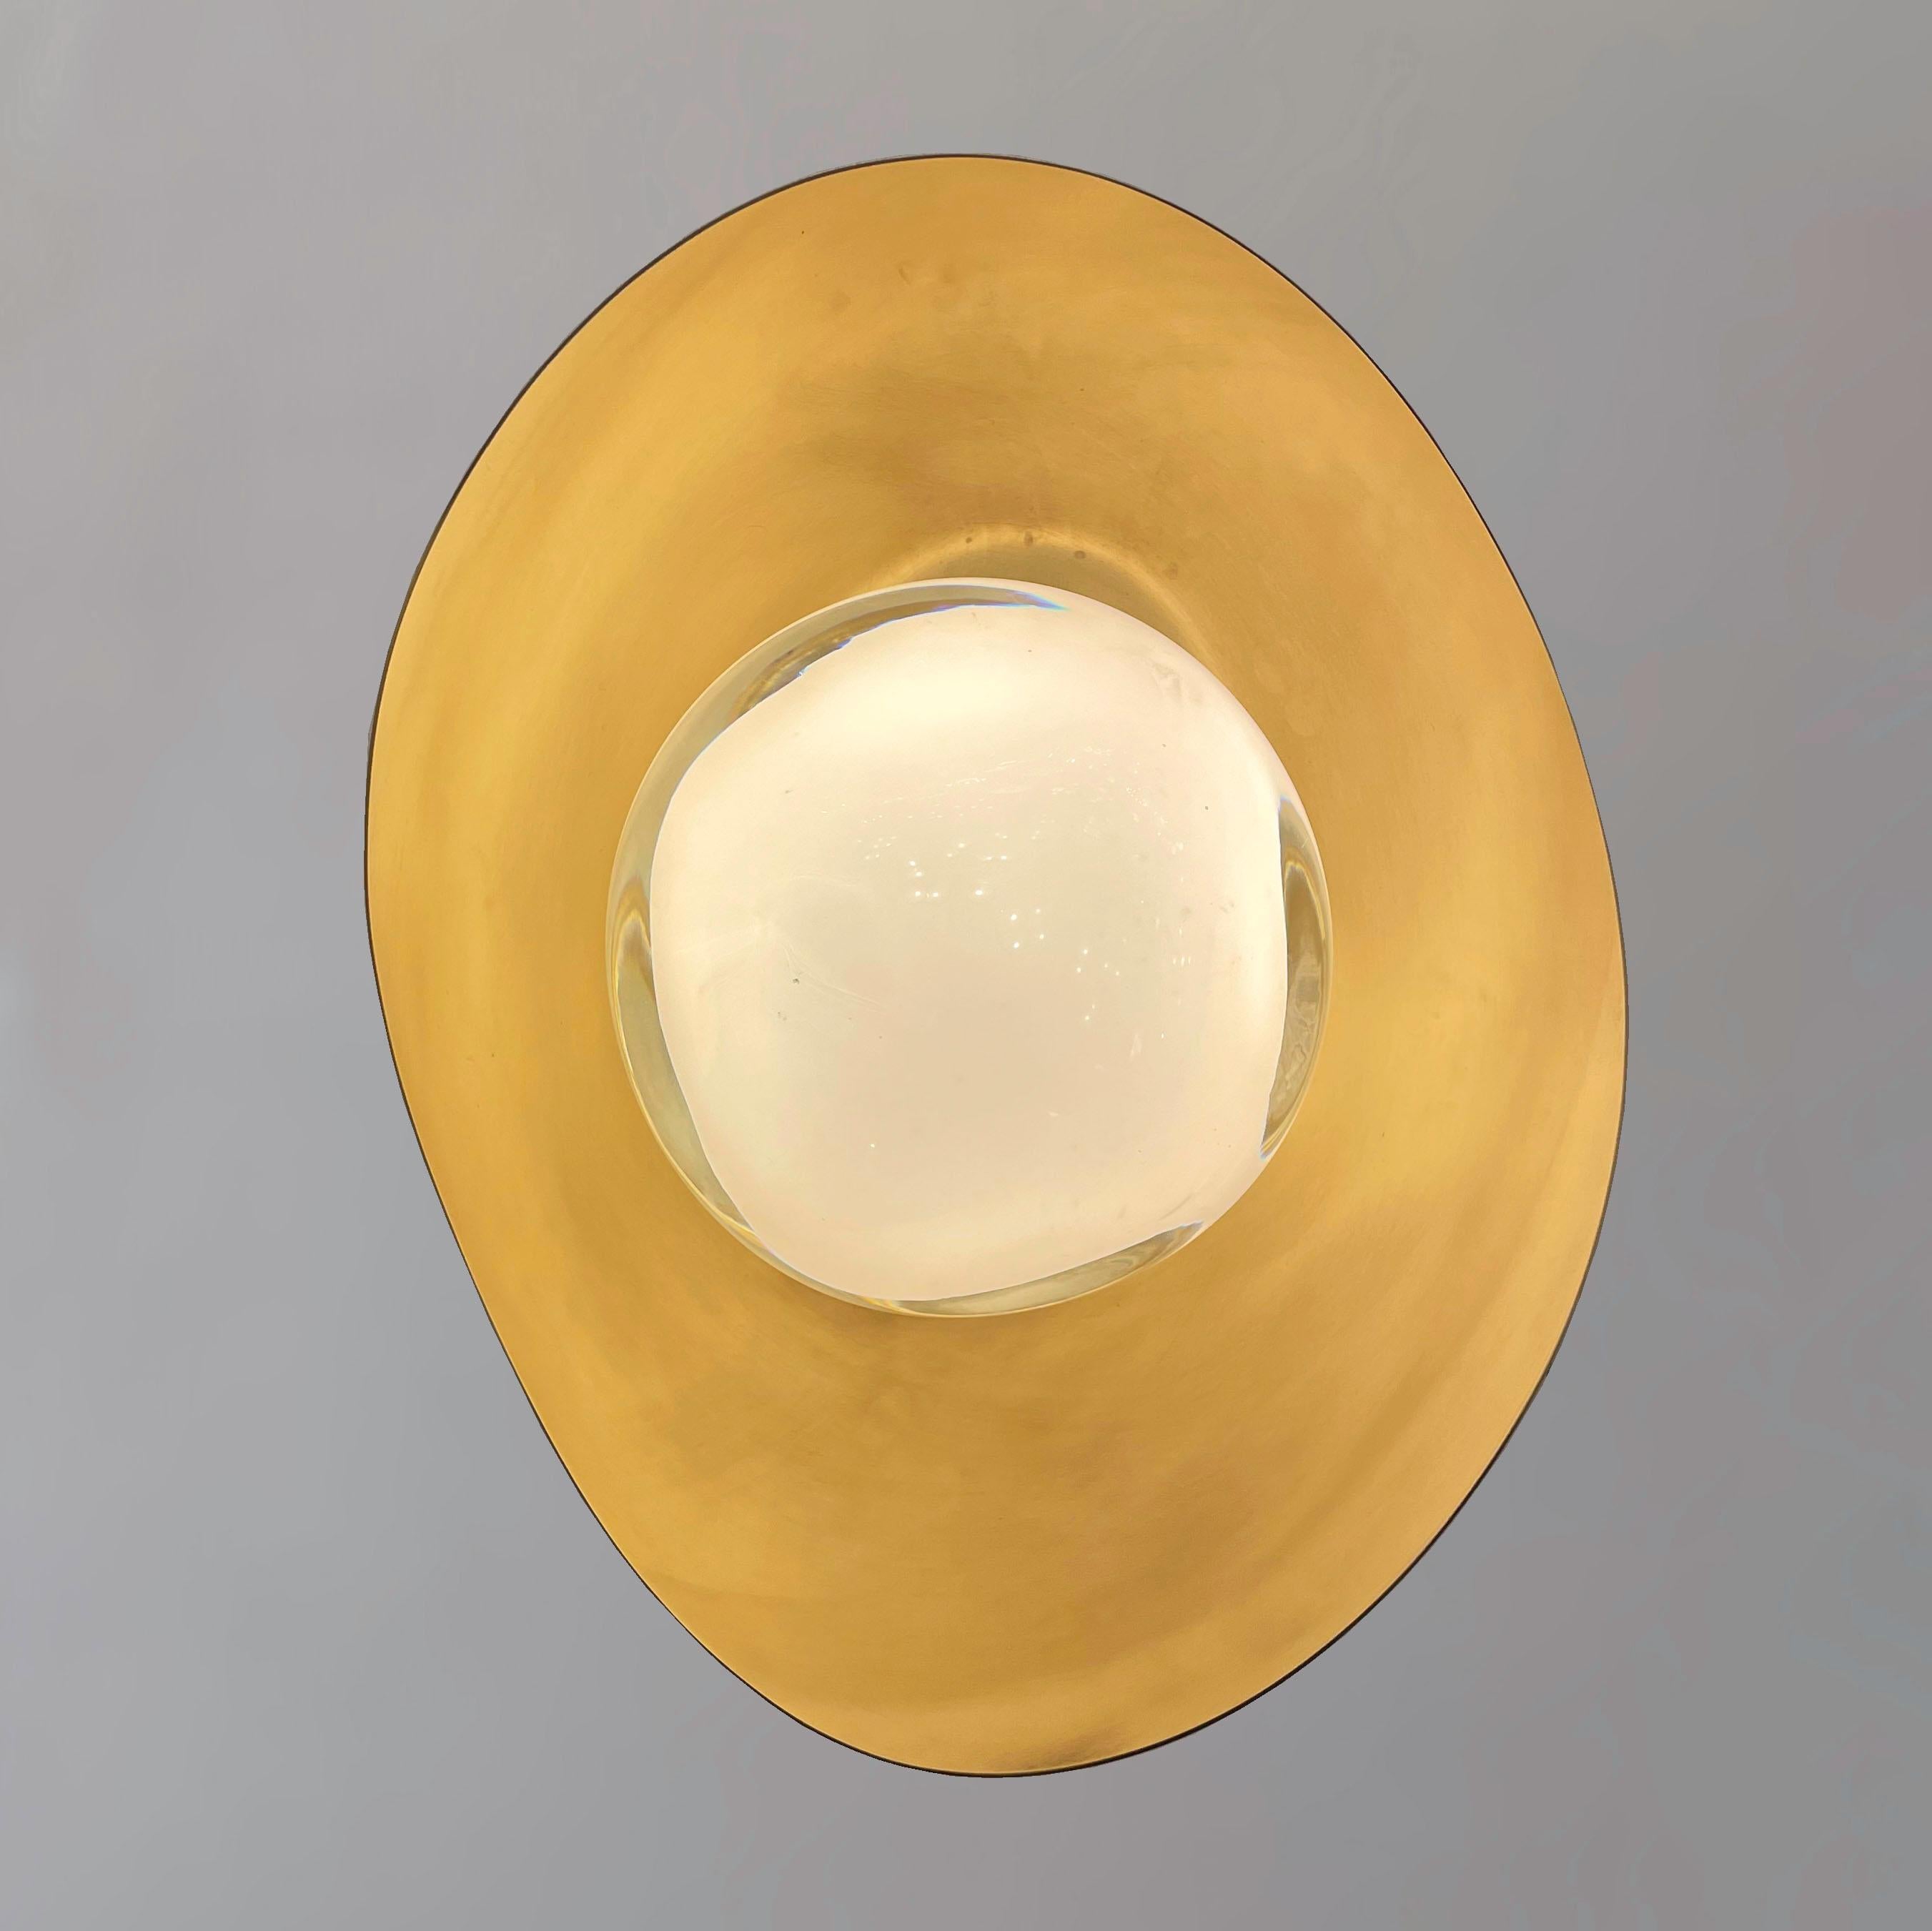 Perla Wall Light by Gaspare Asaro-Satin Brass/Bronze Finish In New Condition For Sale In New York, NY